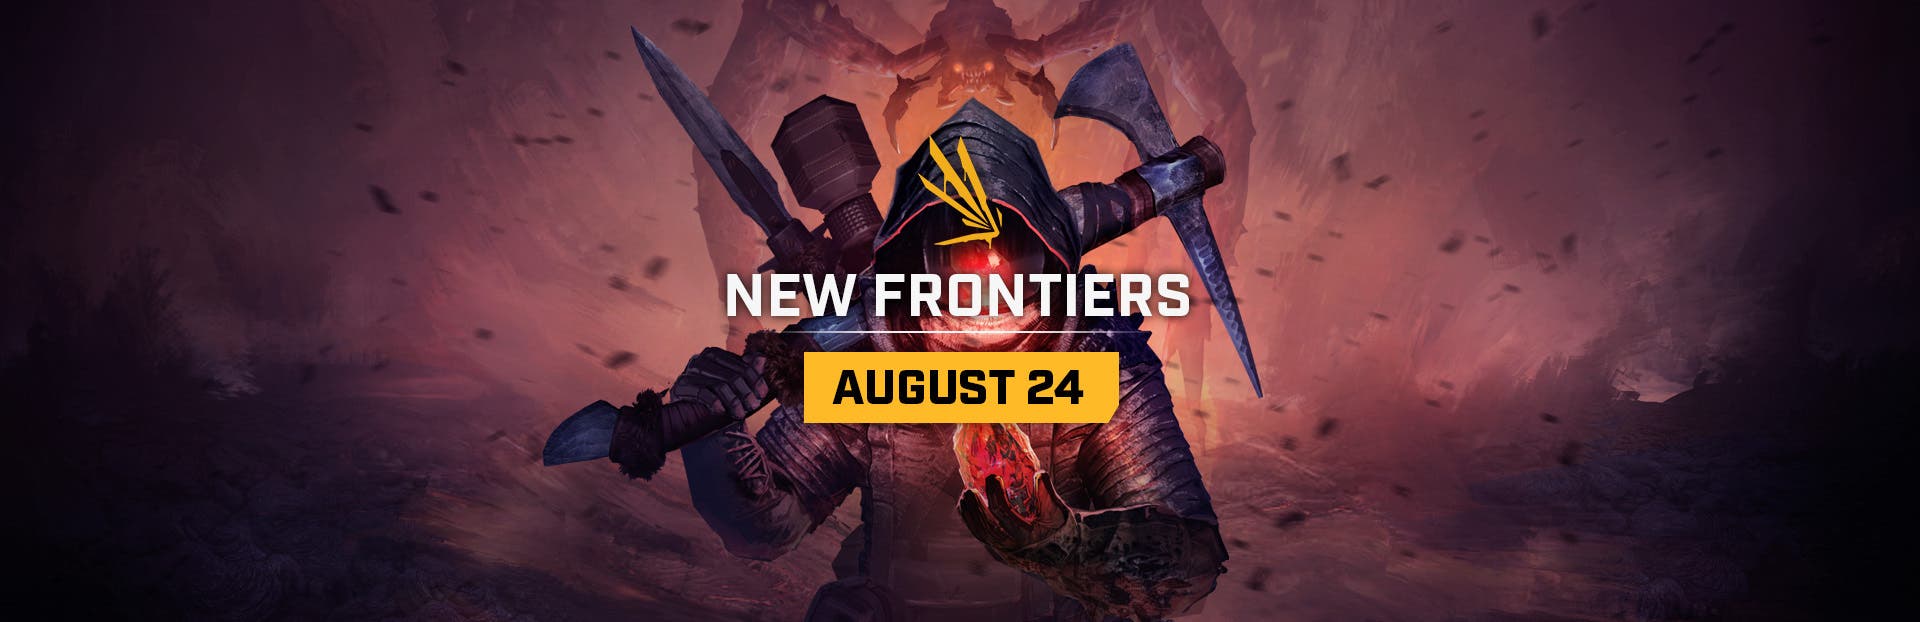 ICARUS - New Frontiers  Releasing August 24th - Steam News :  r/SurviveIcarus